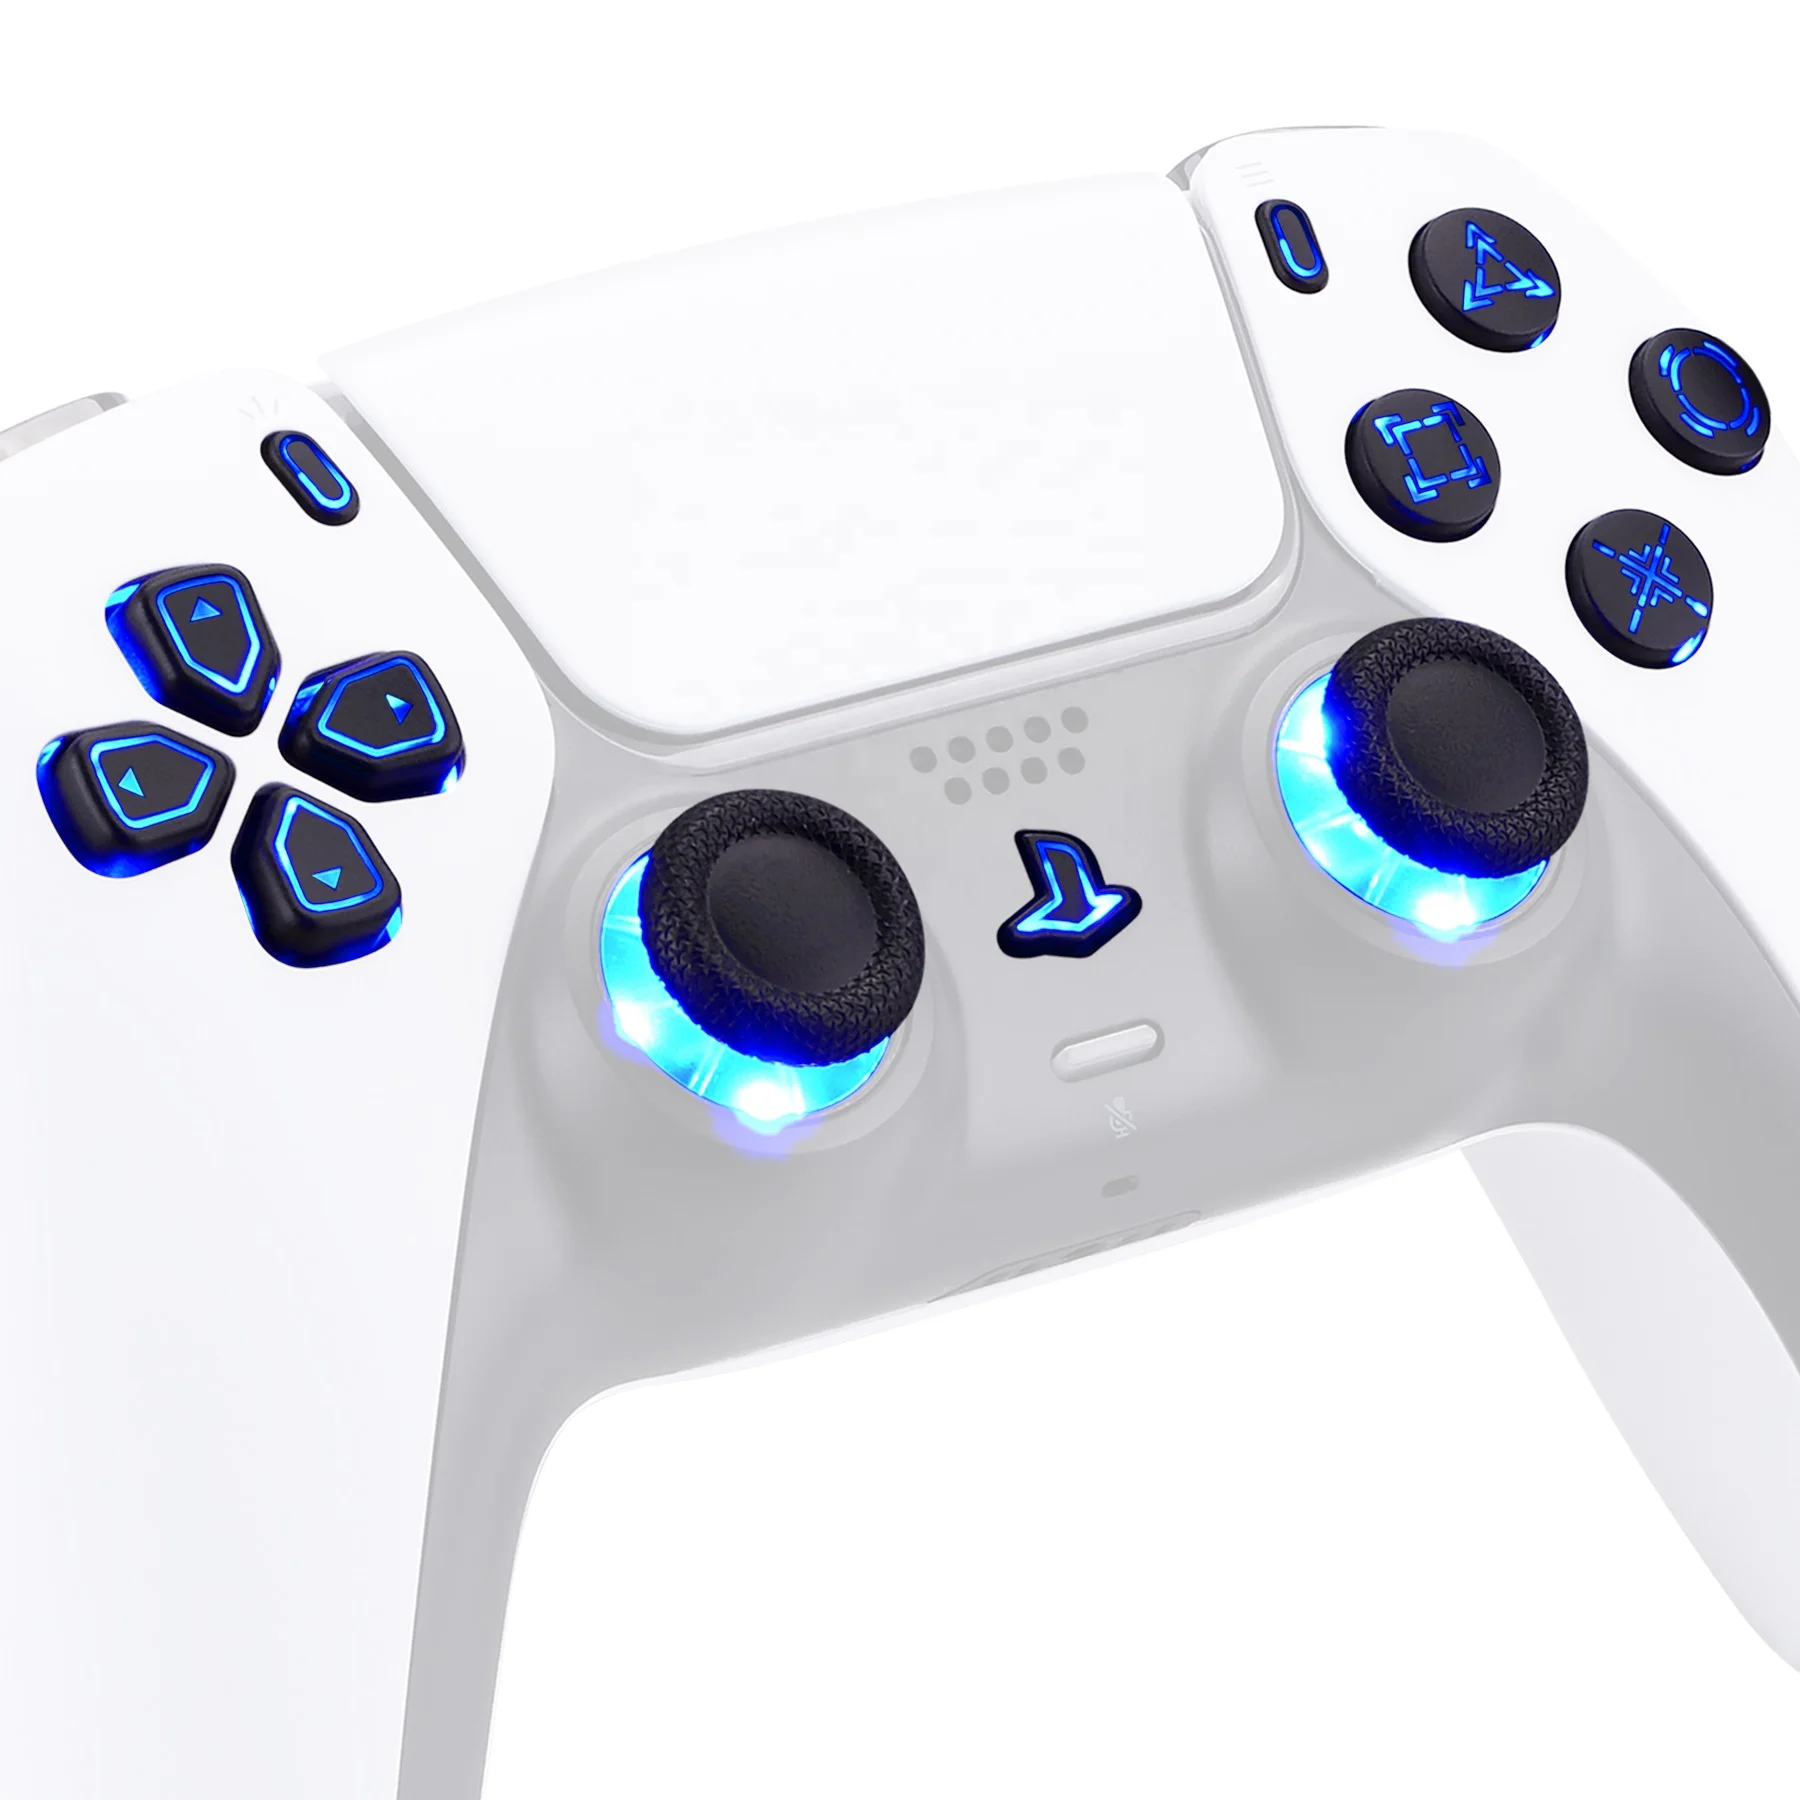 

Atmosphere Light PS5 Gamepad Accessories LED Kits for ILLuminated D-pad Share Option Home Face Buttons Thumb Sticks